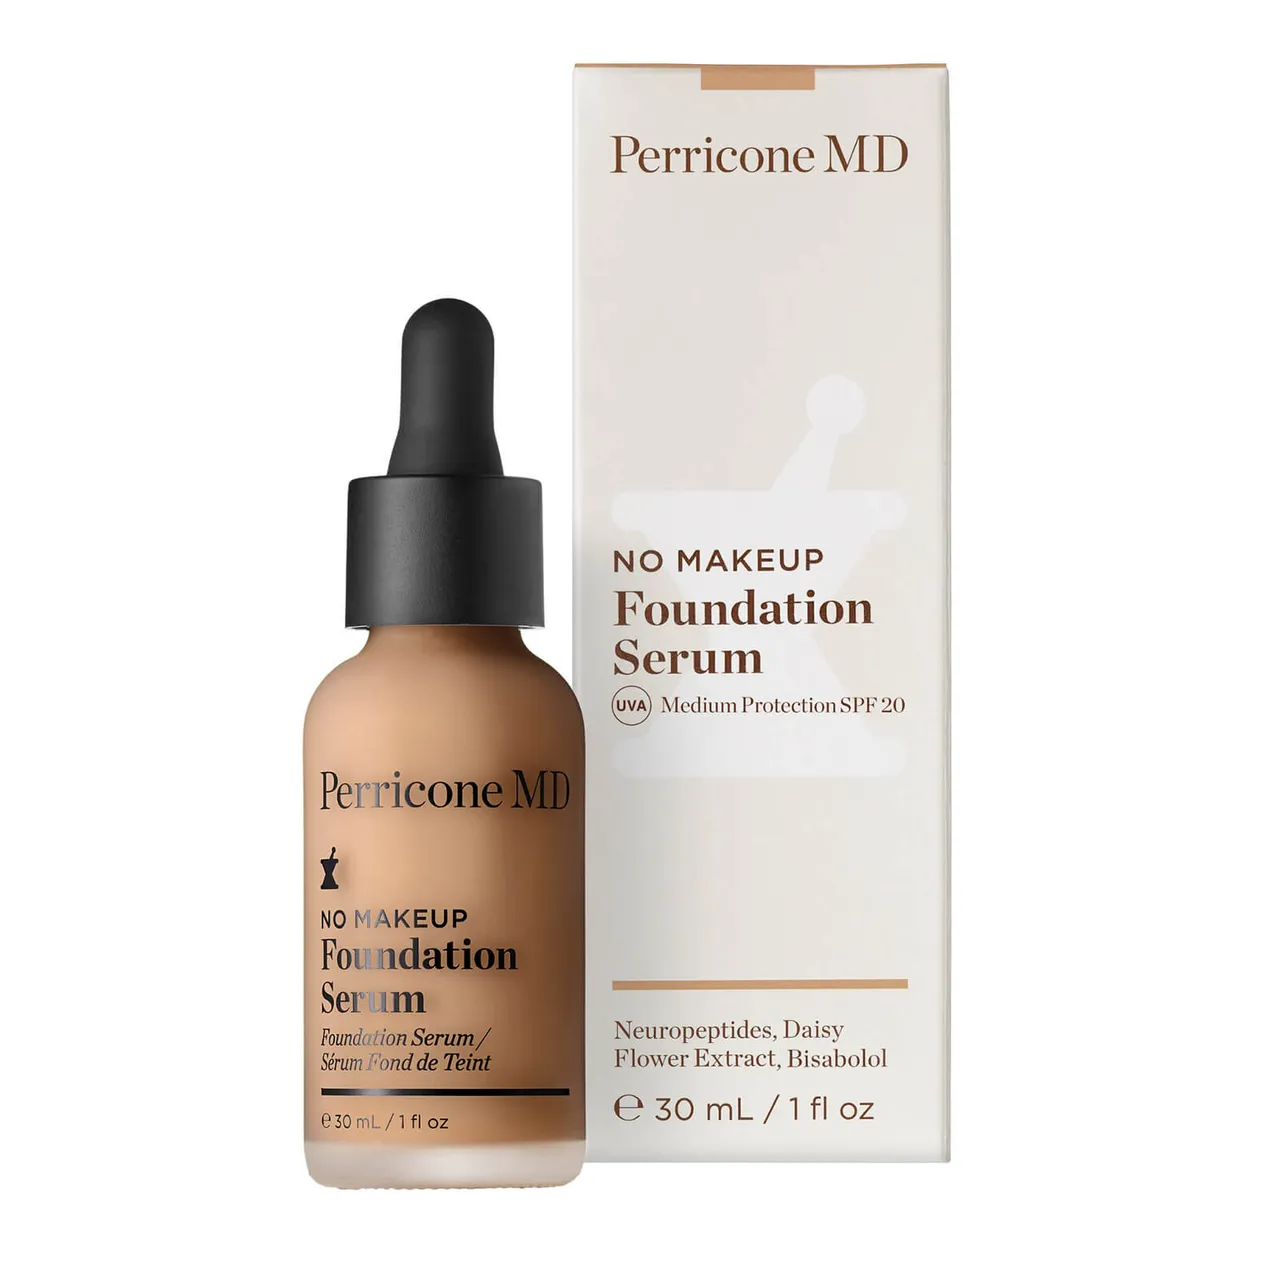 Perricone MD No Makeup Foundation Serum Broad Spectrum SPF20 30ml (Various Shades) - 5 Beige